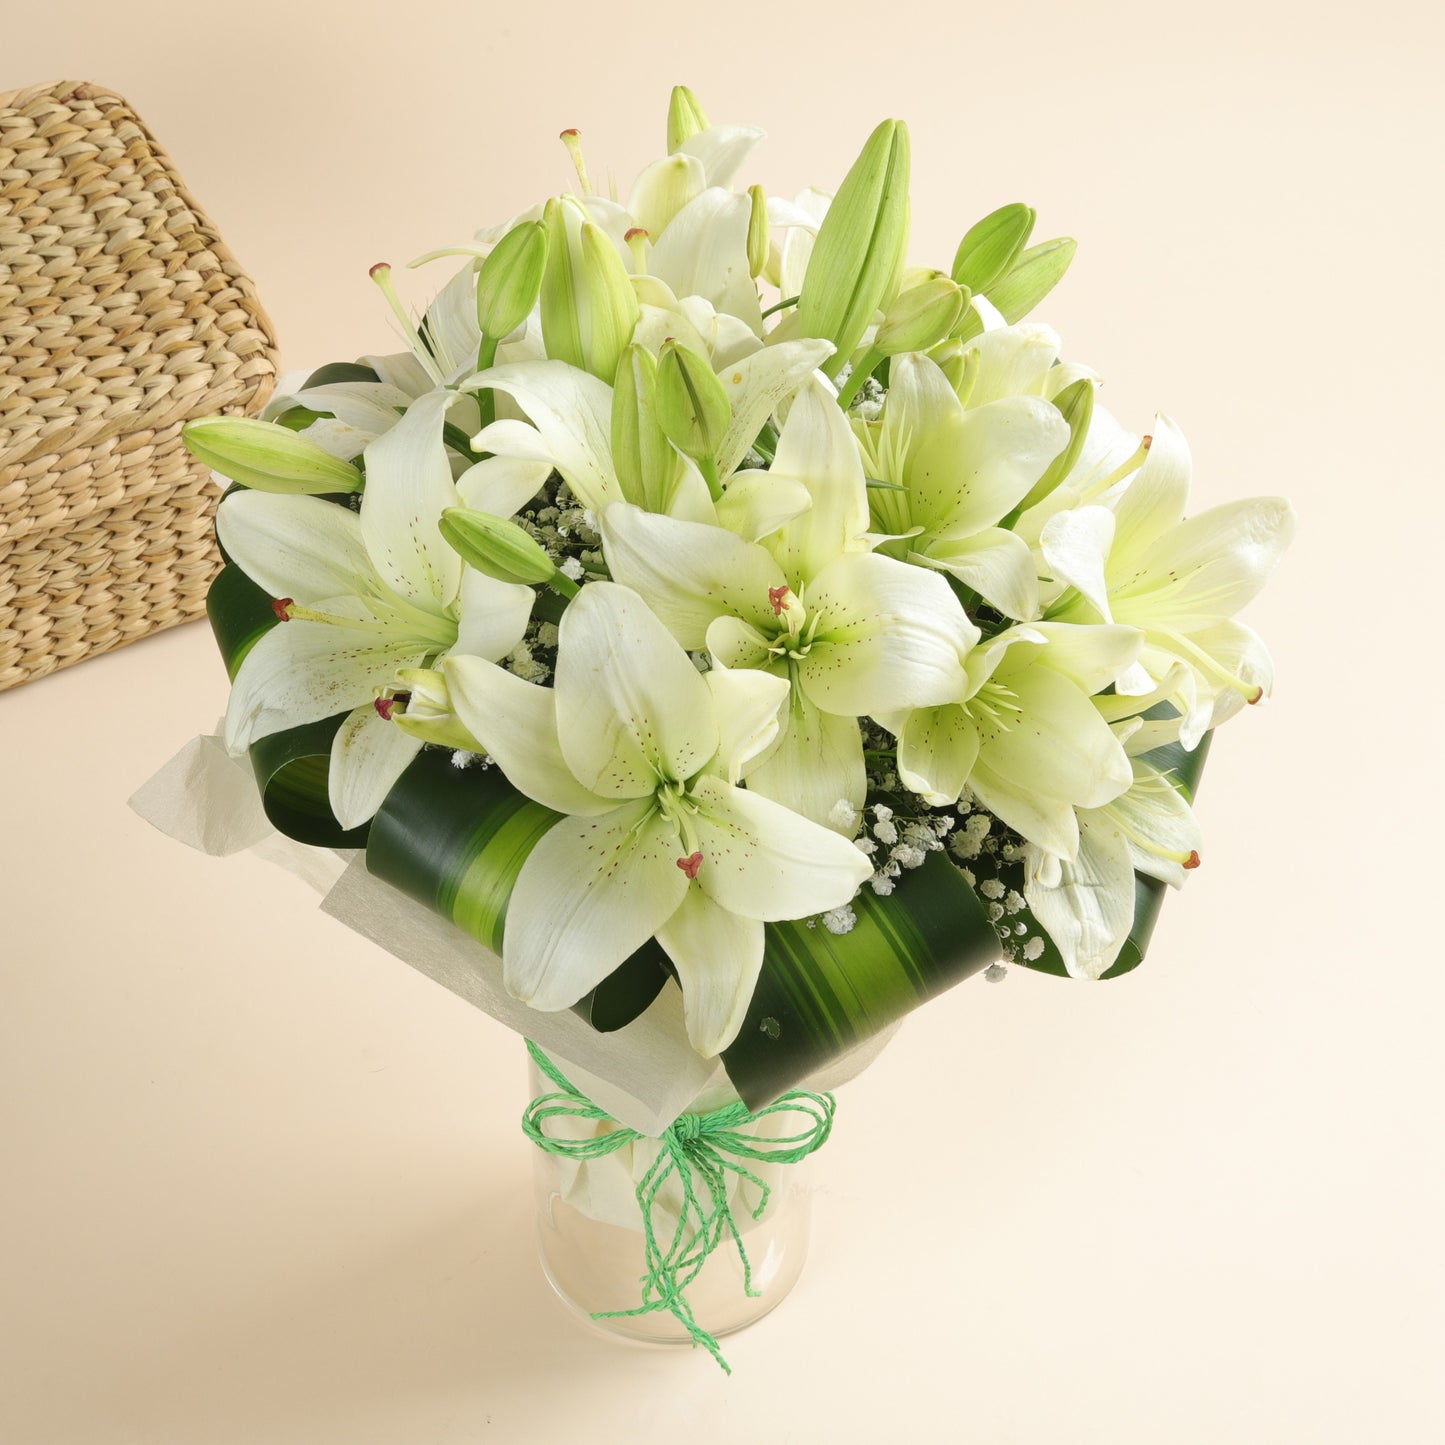 A Beautiful 6 White Asiatic Lilies in a Tied Vase